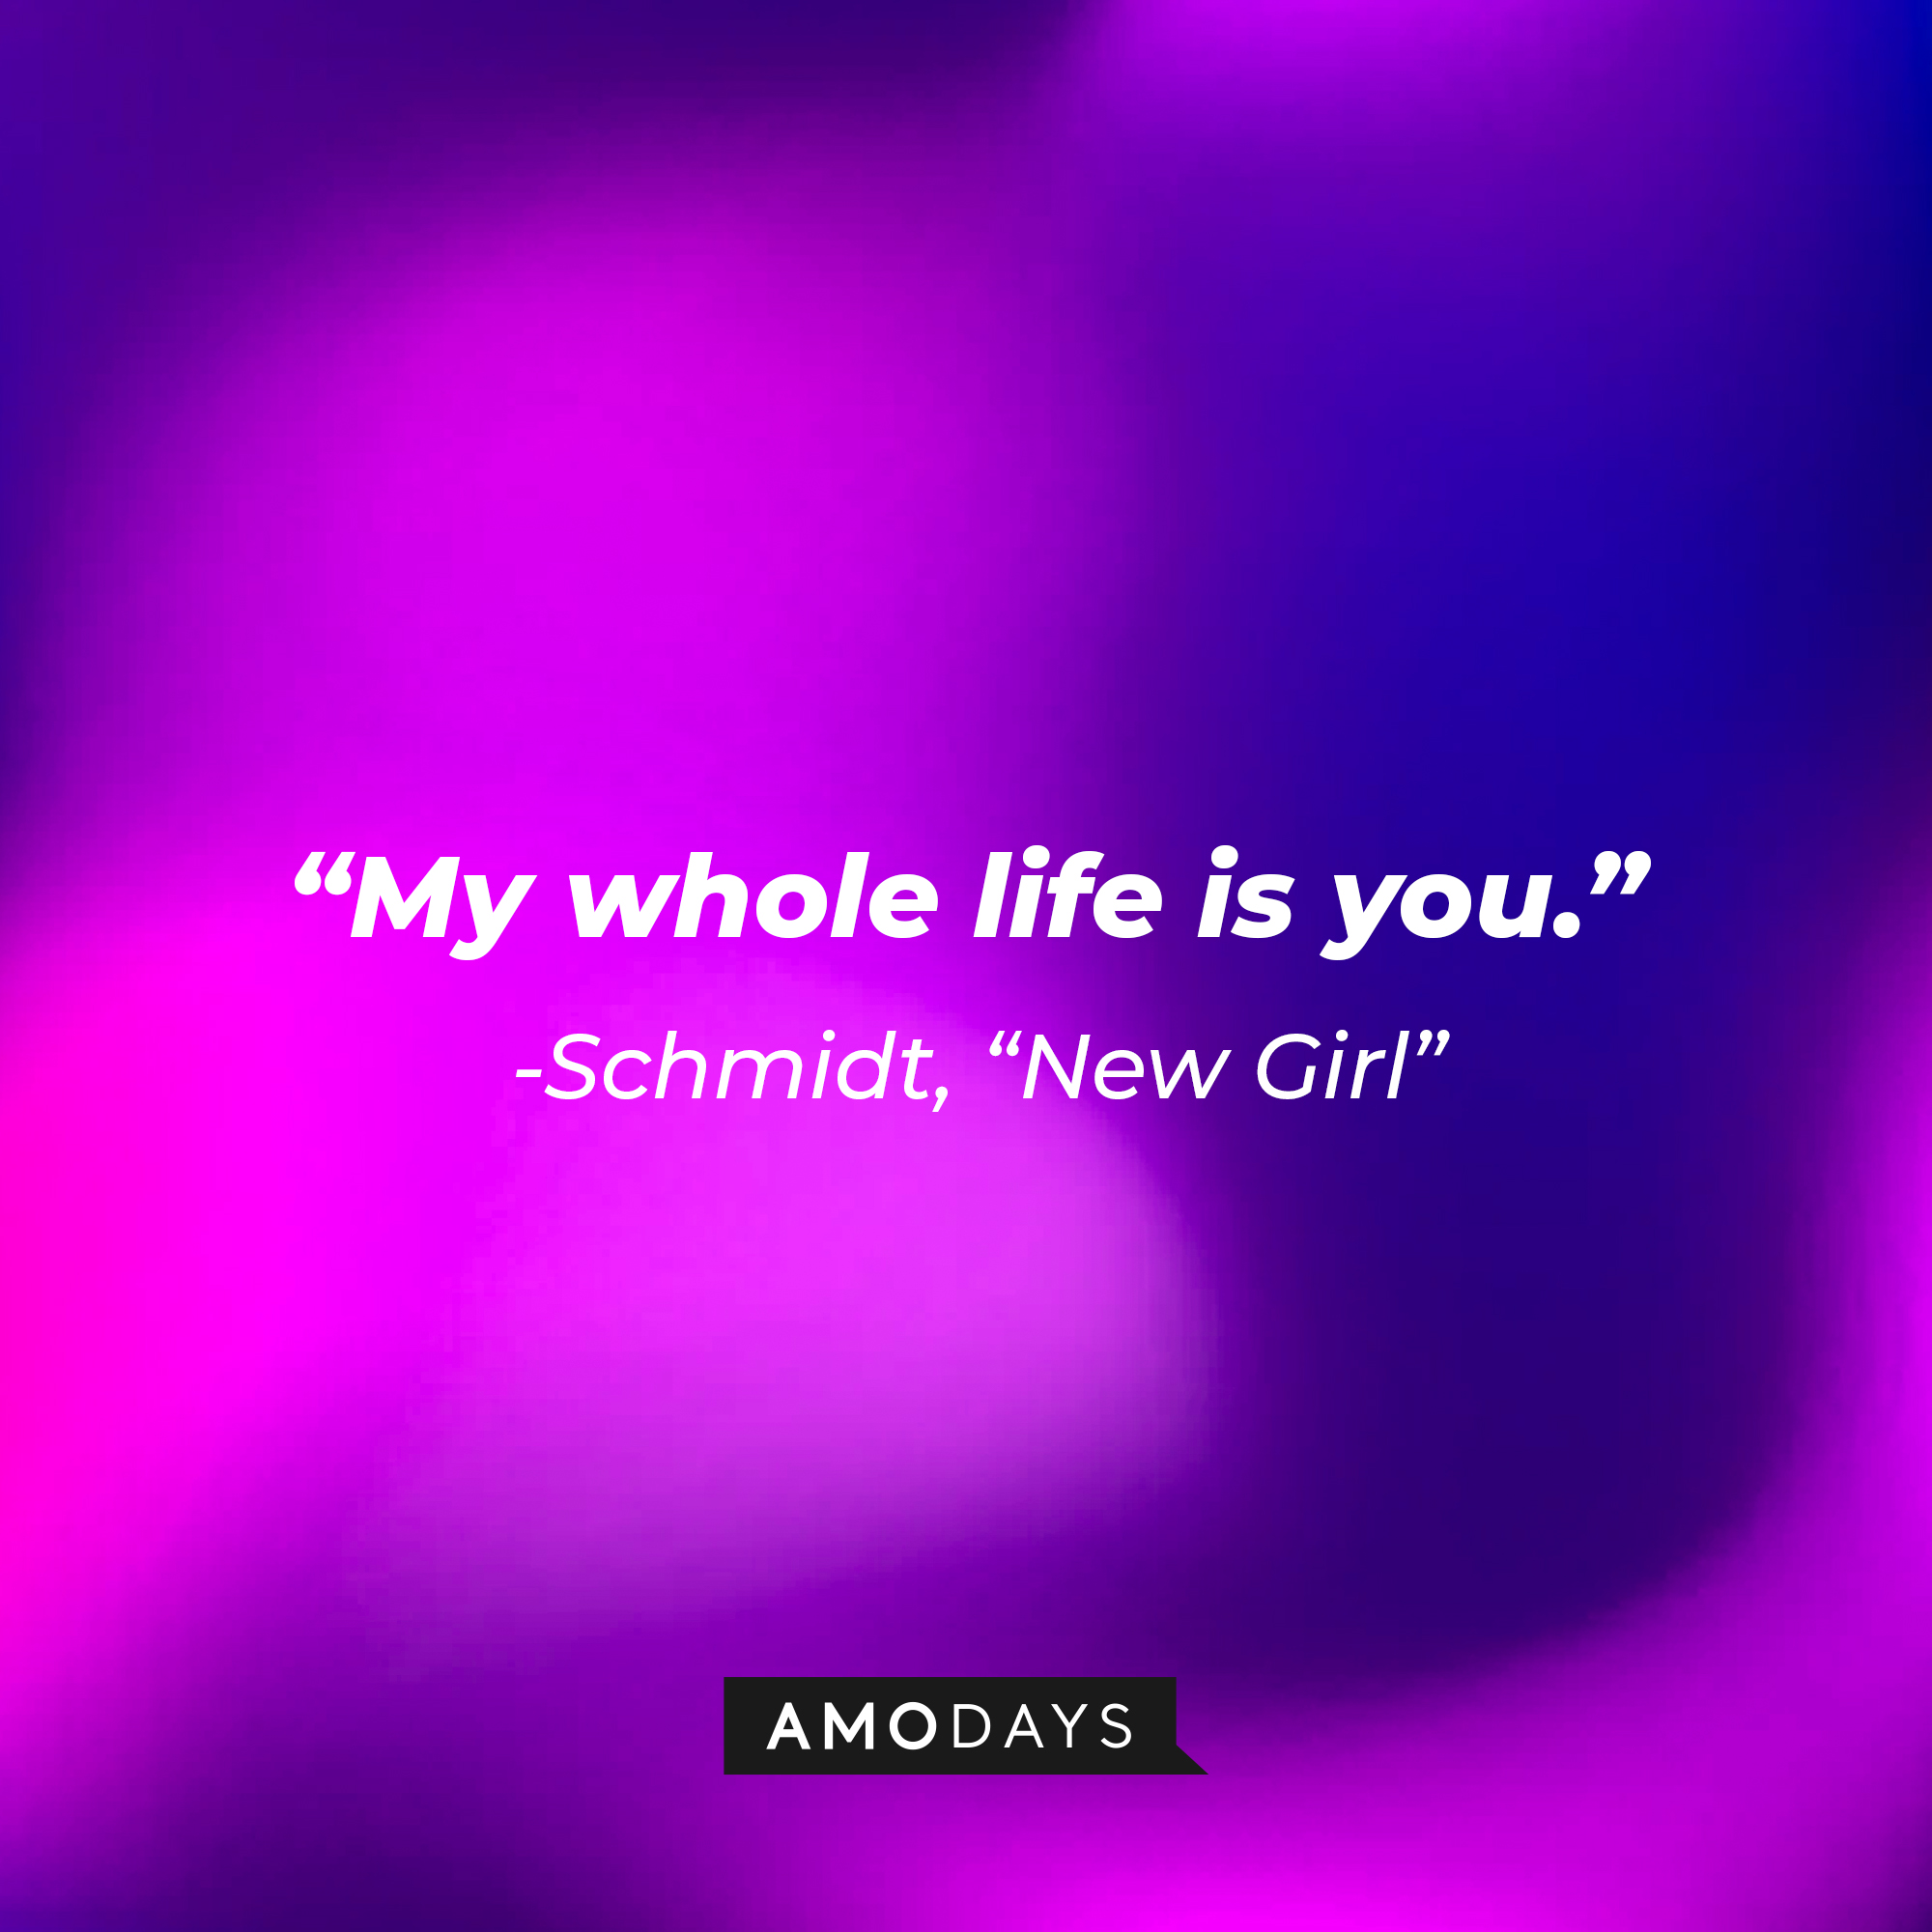 Schmidt's quote: "My whole life is you." | Source: Amodays